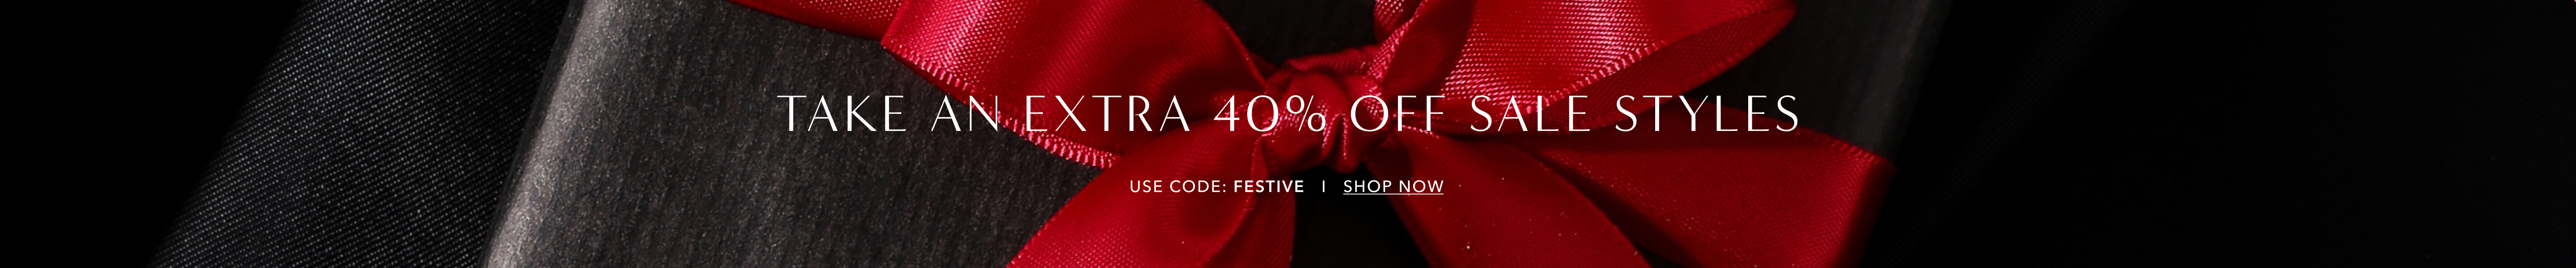 Take An Extra 40% Off Sale Styles Use Code: FESTIVE